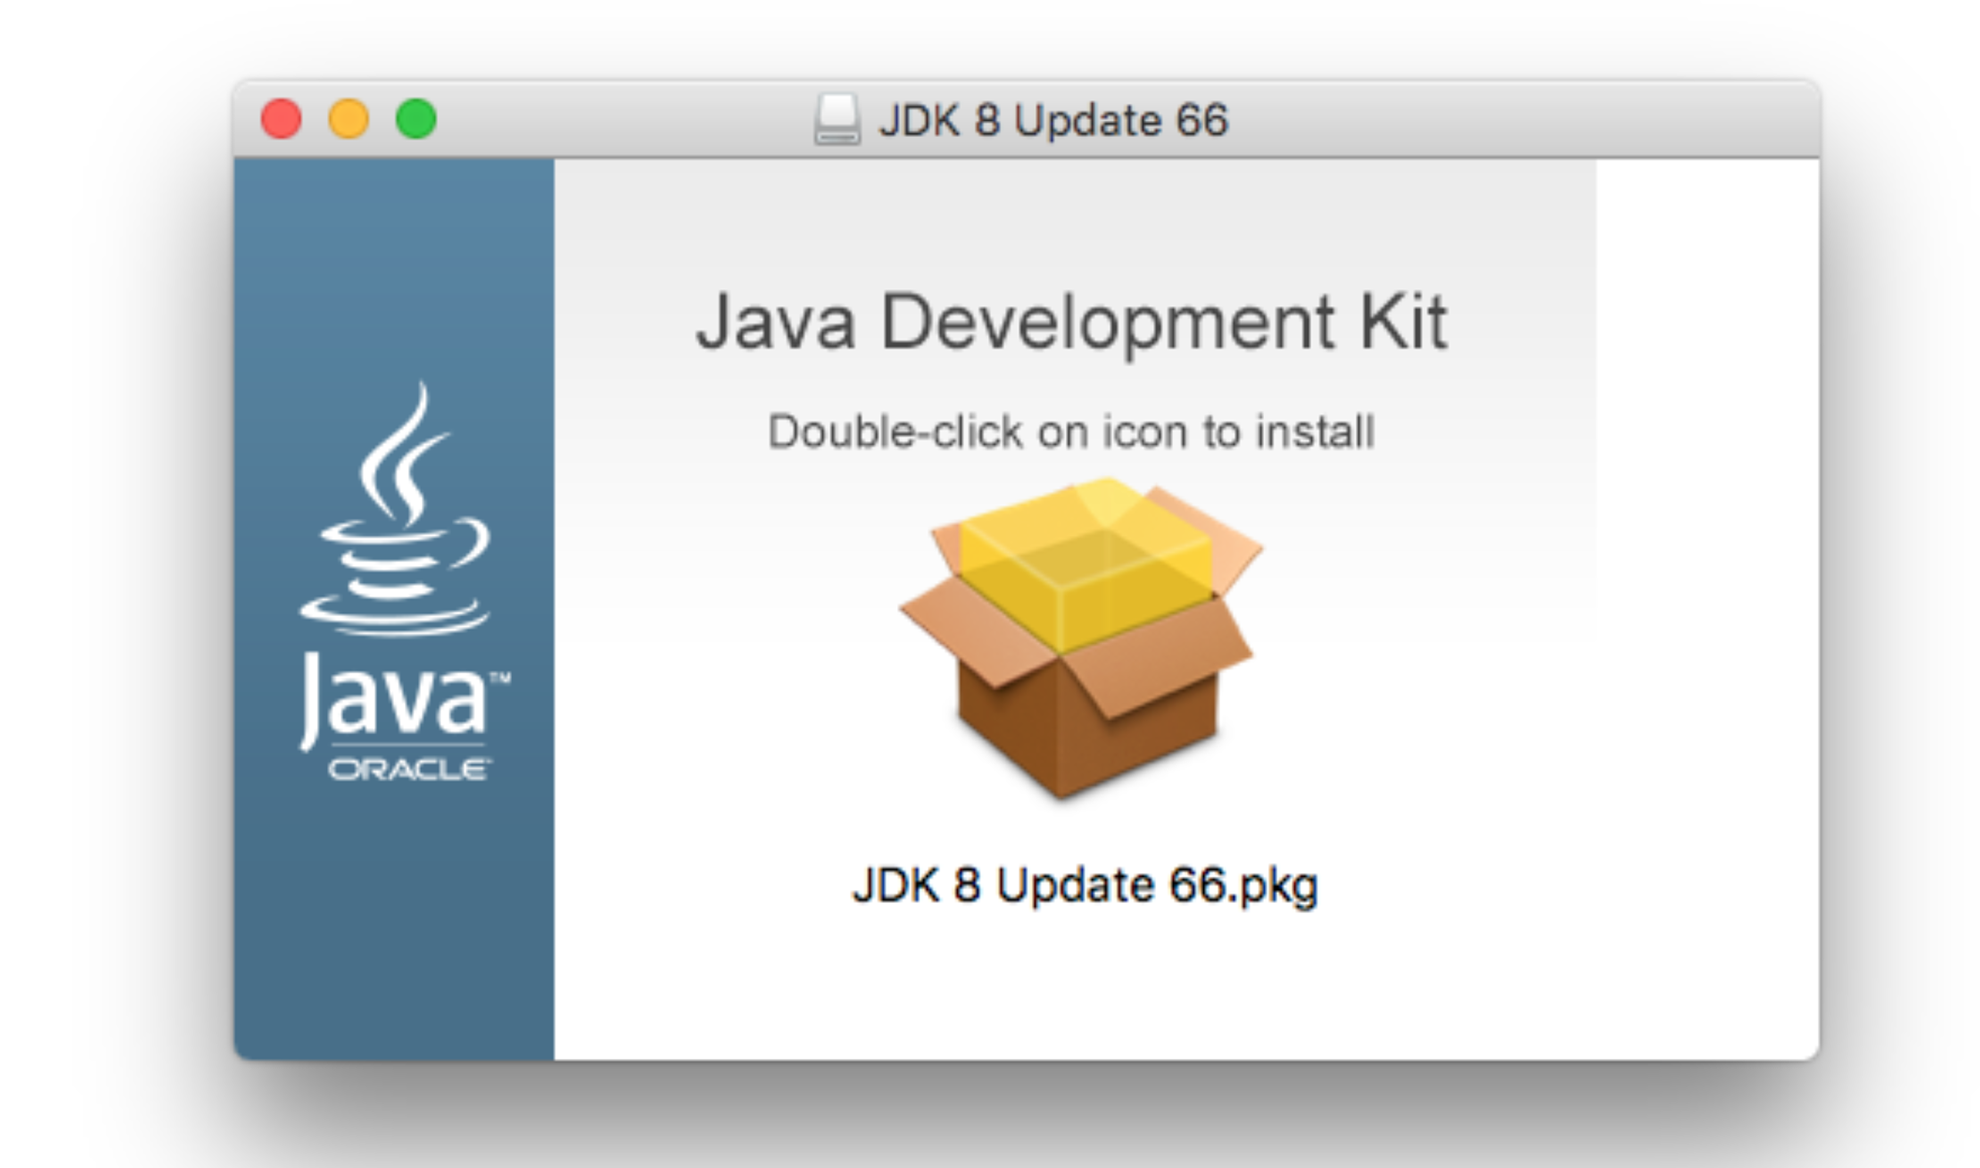 Mac: Extract JDK to folder, without running installer